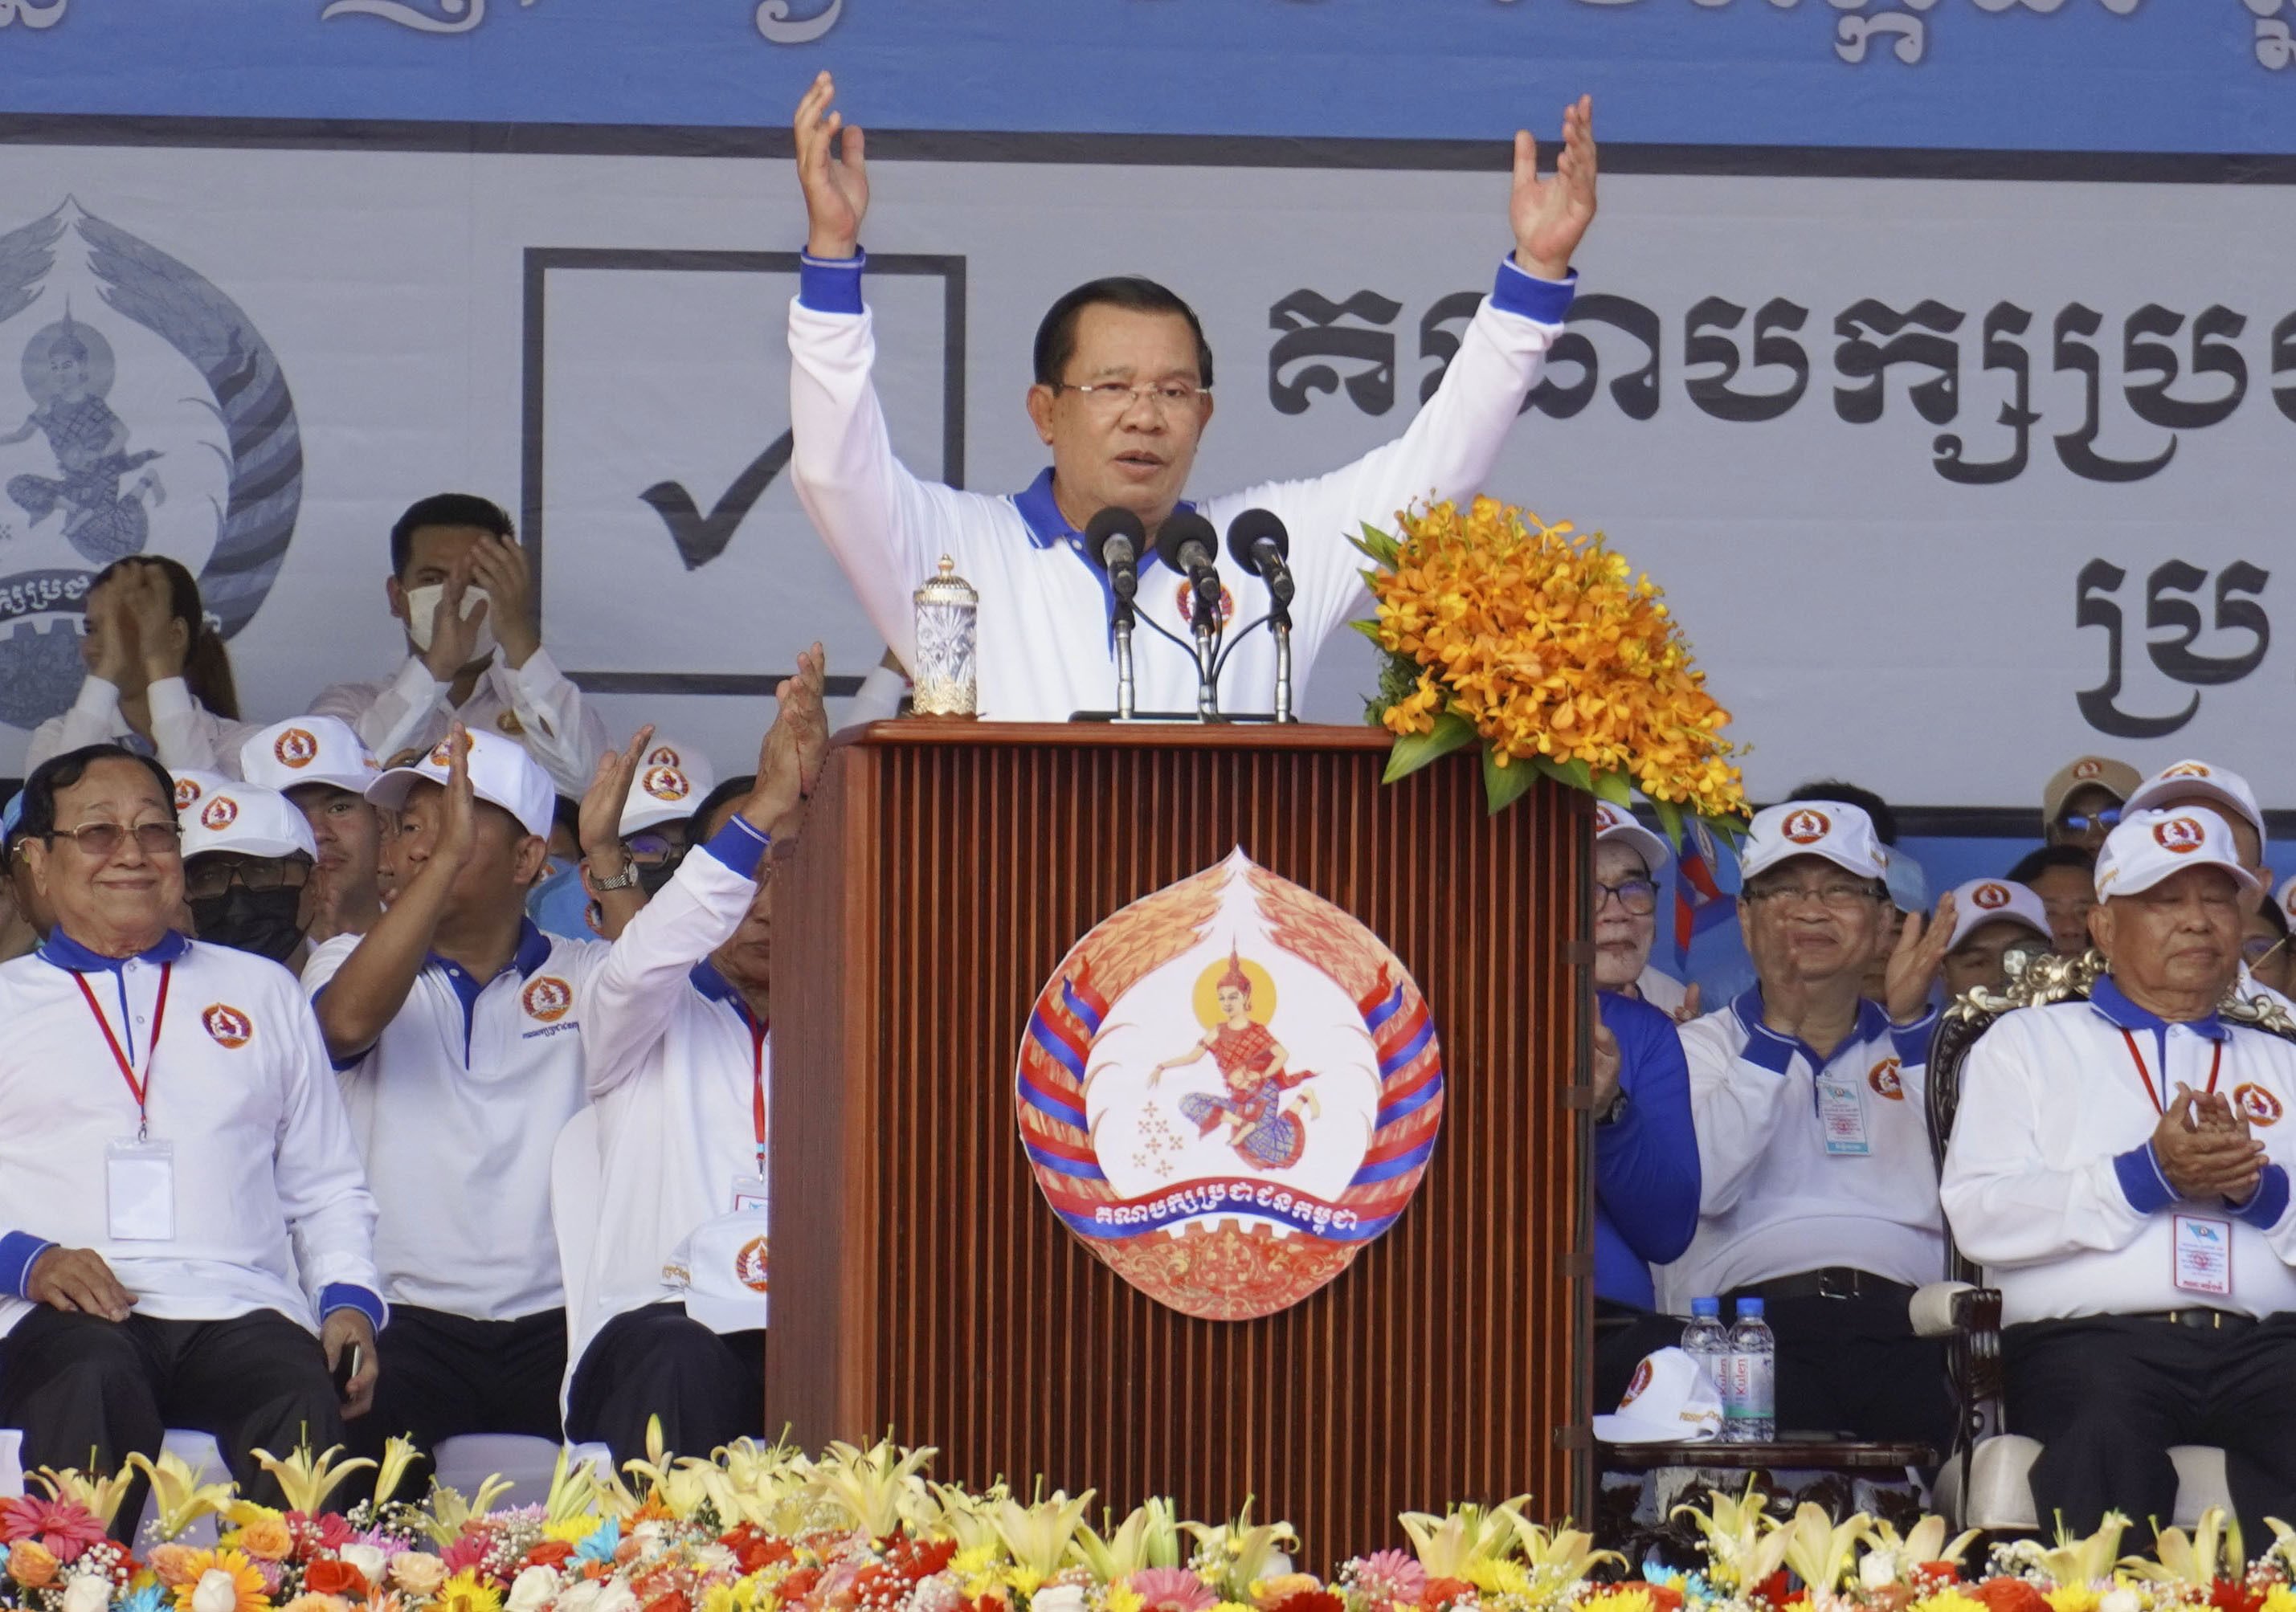 Without Facebook, Hun Sen’s daily deluge of hectoring speeches is not reaching his 14 million former followers on the platform. Photo: Kyodo